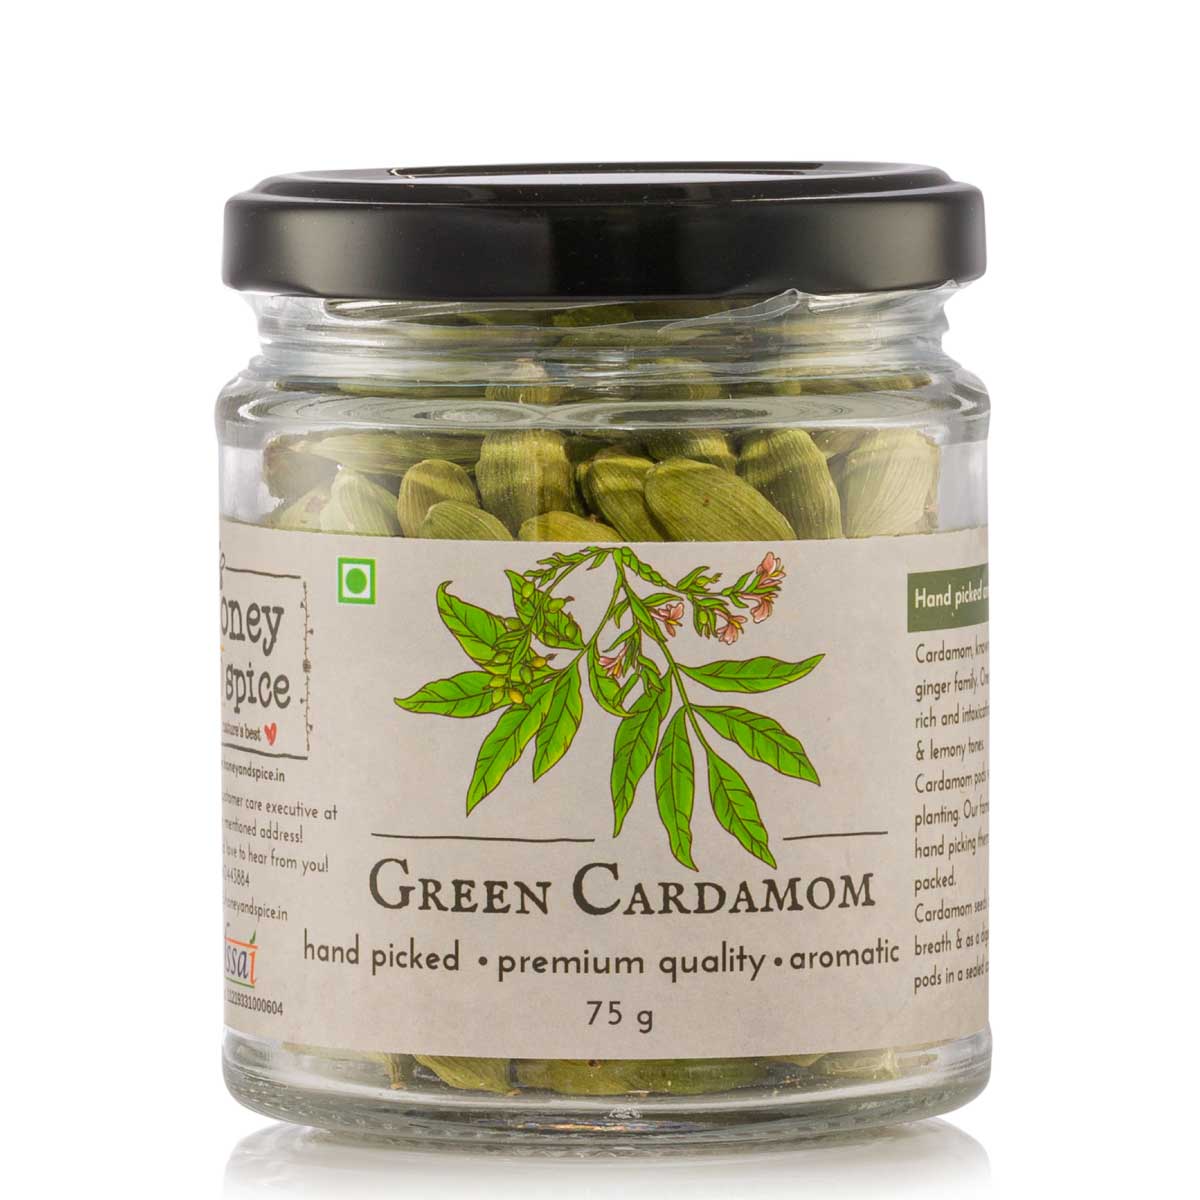 Product: Honey and Spice Cardamom